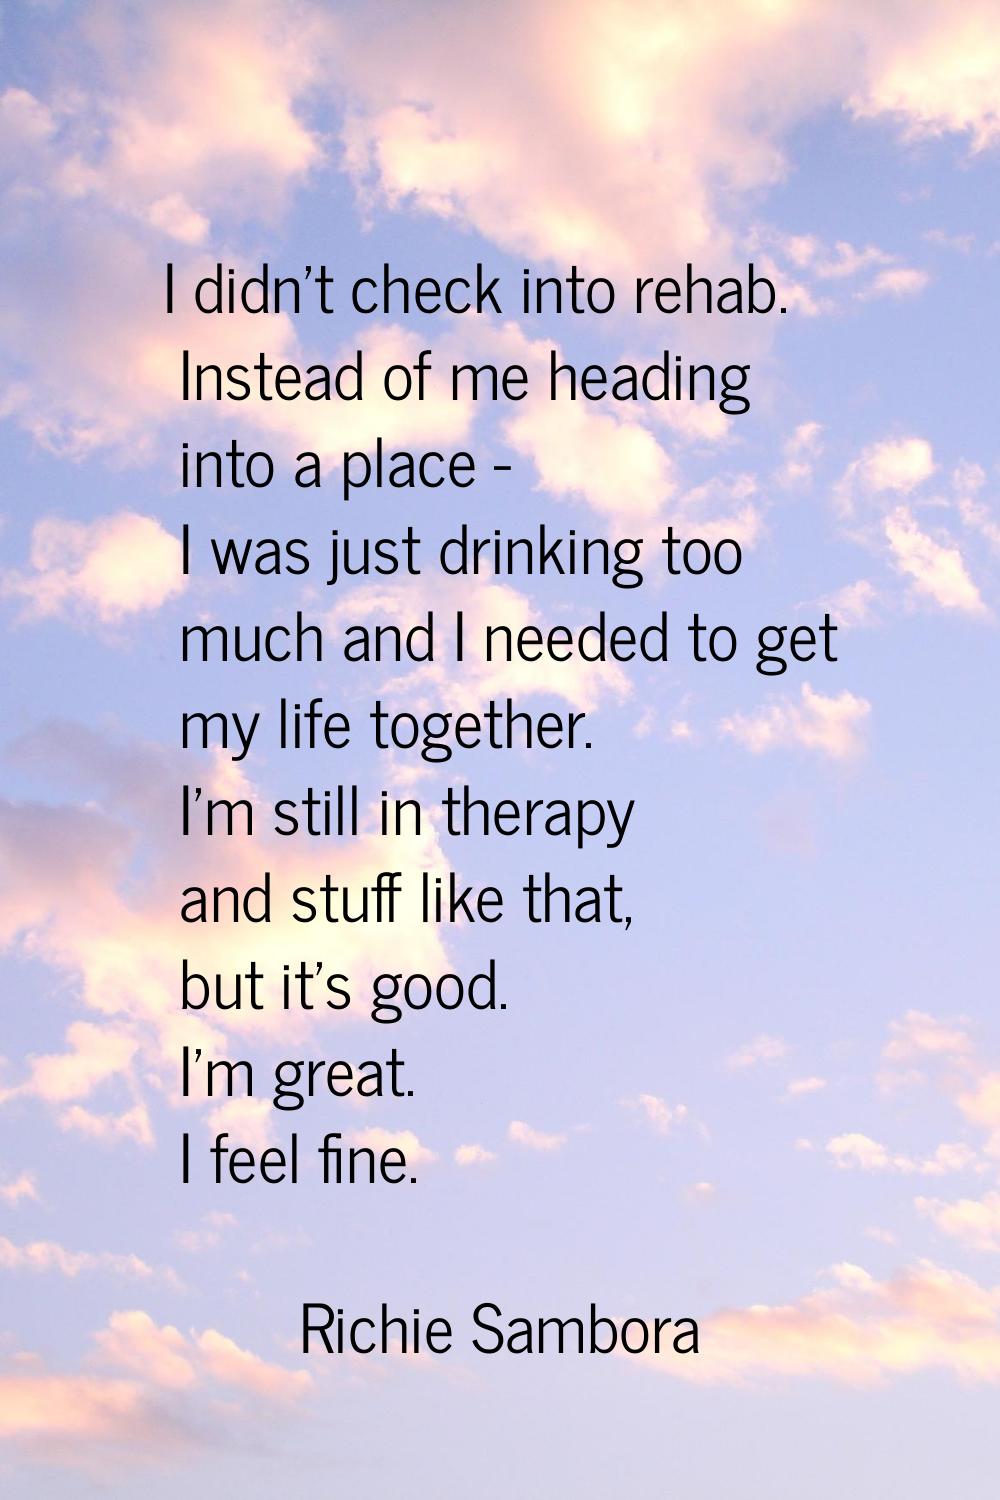 I didn't check into rehab. Instead of me heading into a place - I was just drinking too much and I 